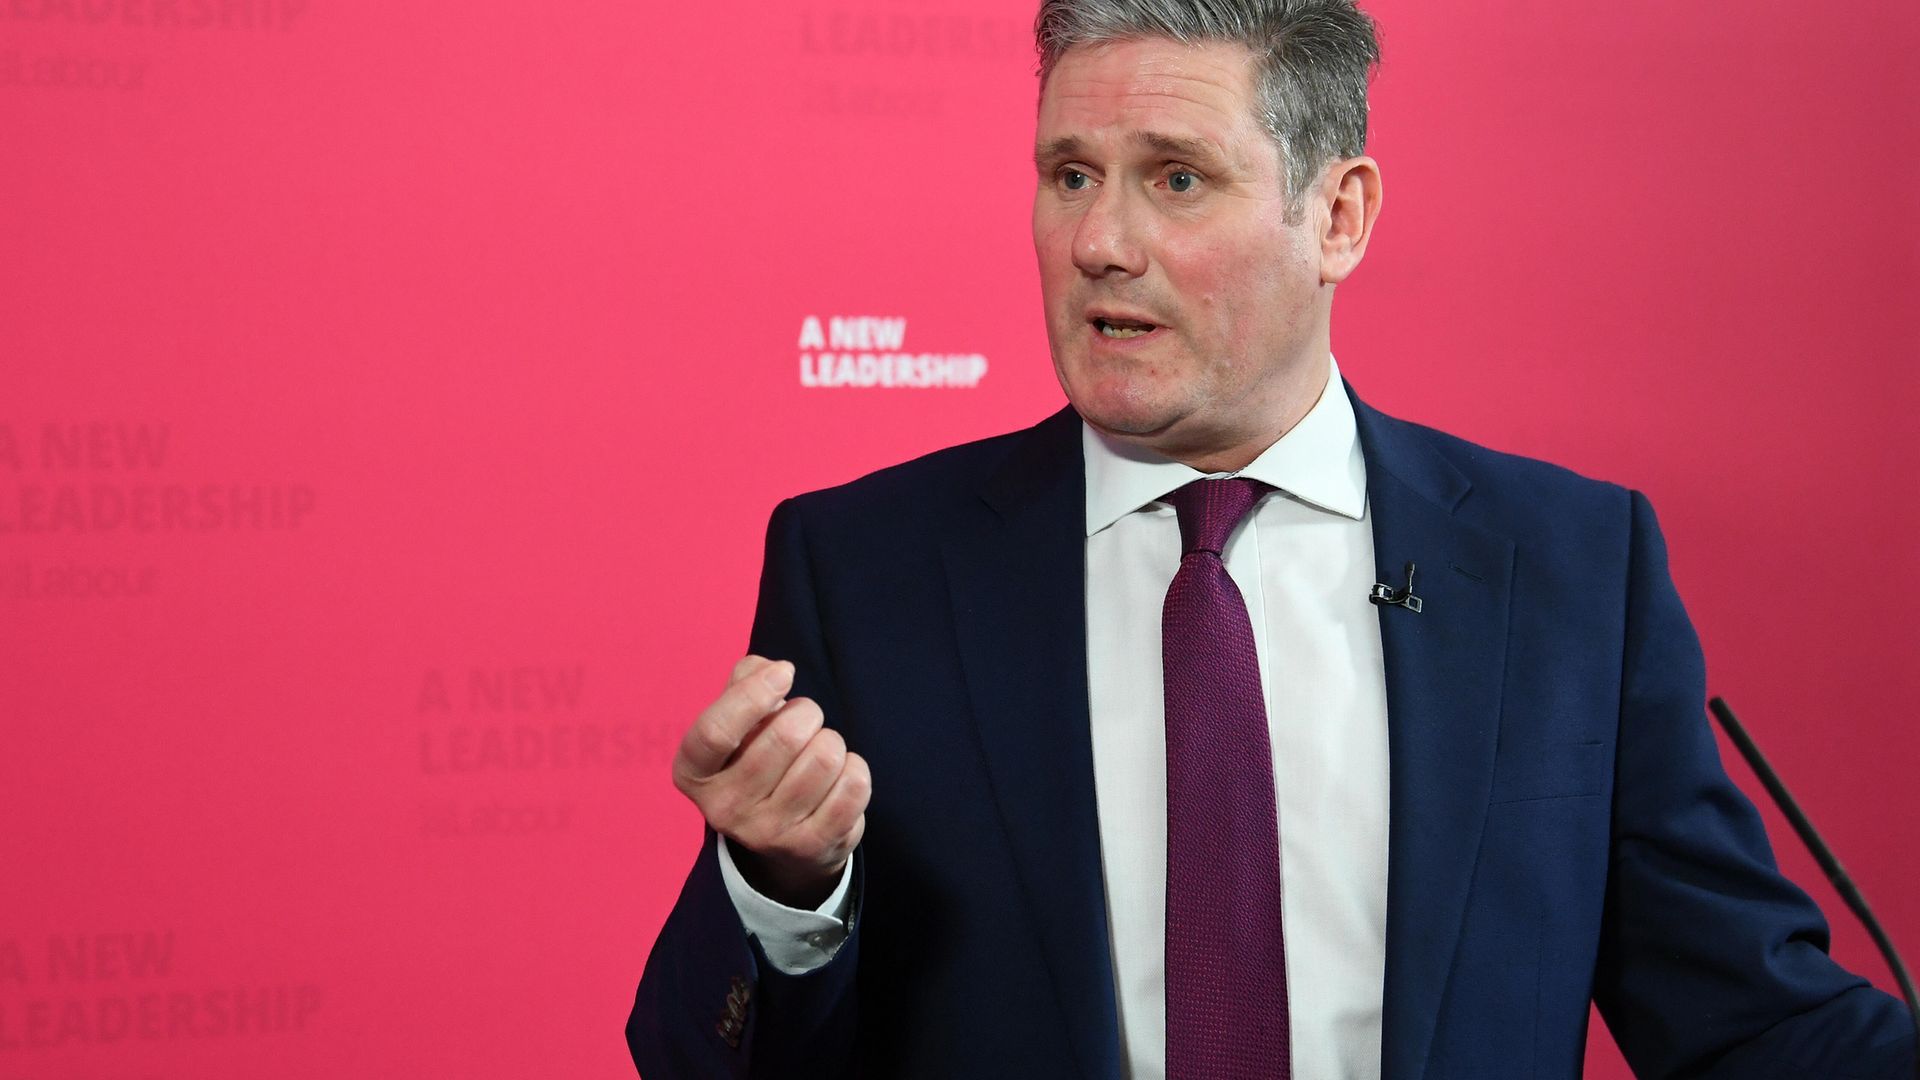 Labour leader Sir Keir Starmer delivers a virtual statement from the Labour Party headquarters, London, following the announcement of an agreement of a post-Brexit trade deal. - Credit: PA